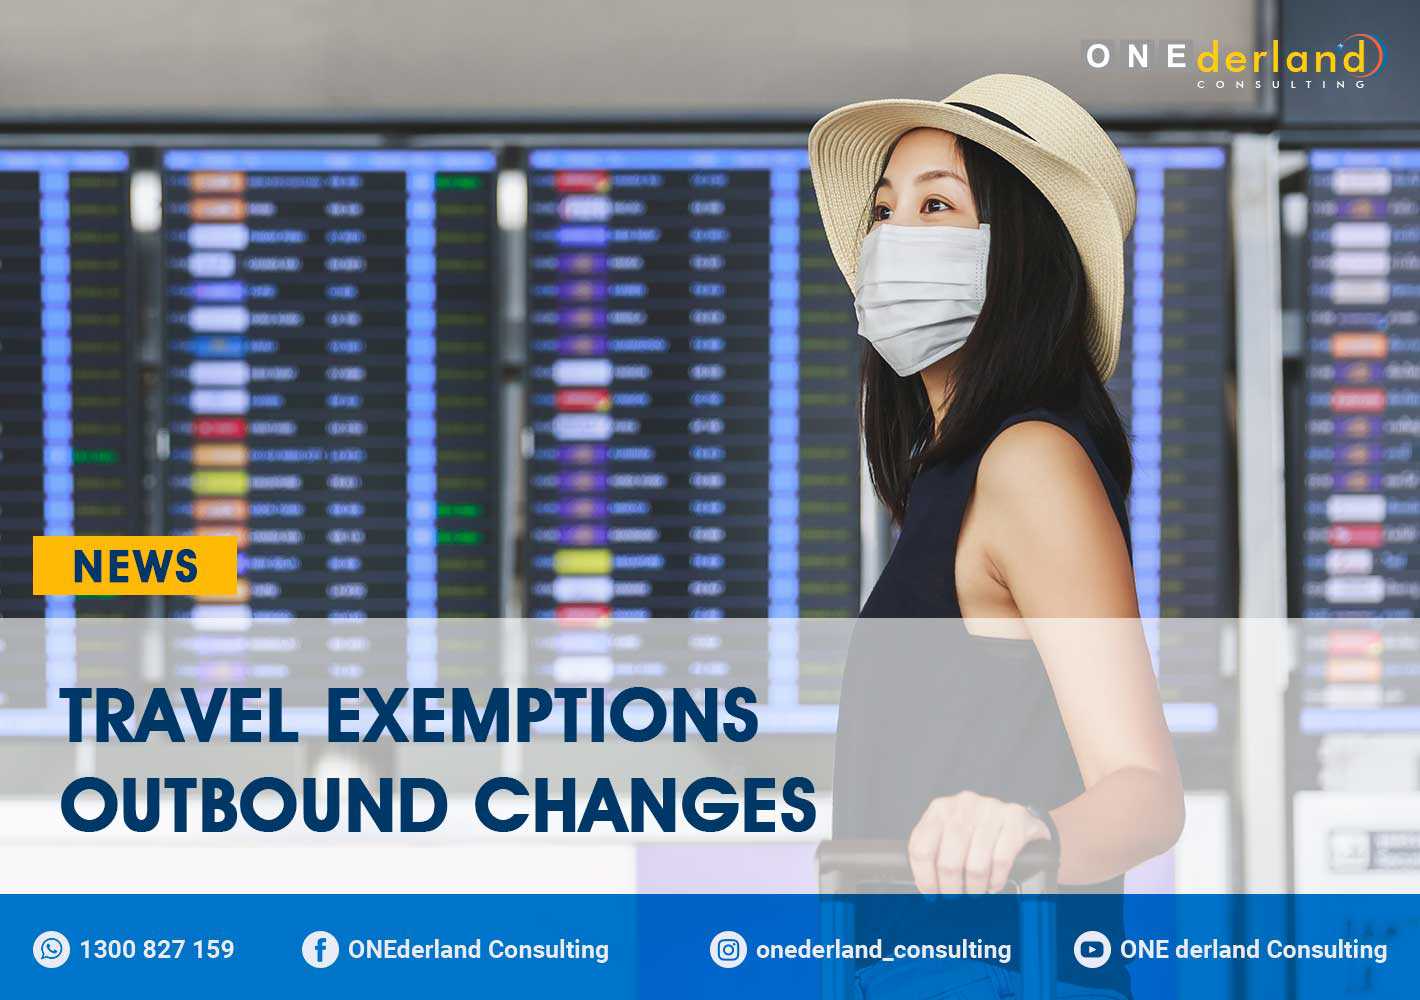 COVID-19 UPDATE: Changes on Travel Exemptions Outbound